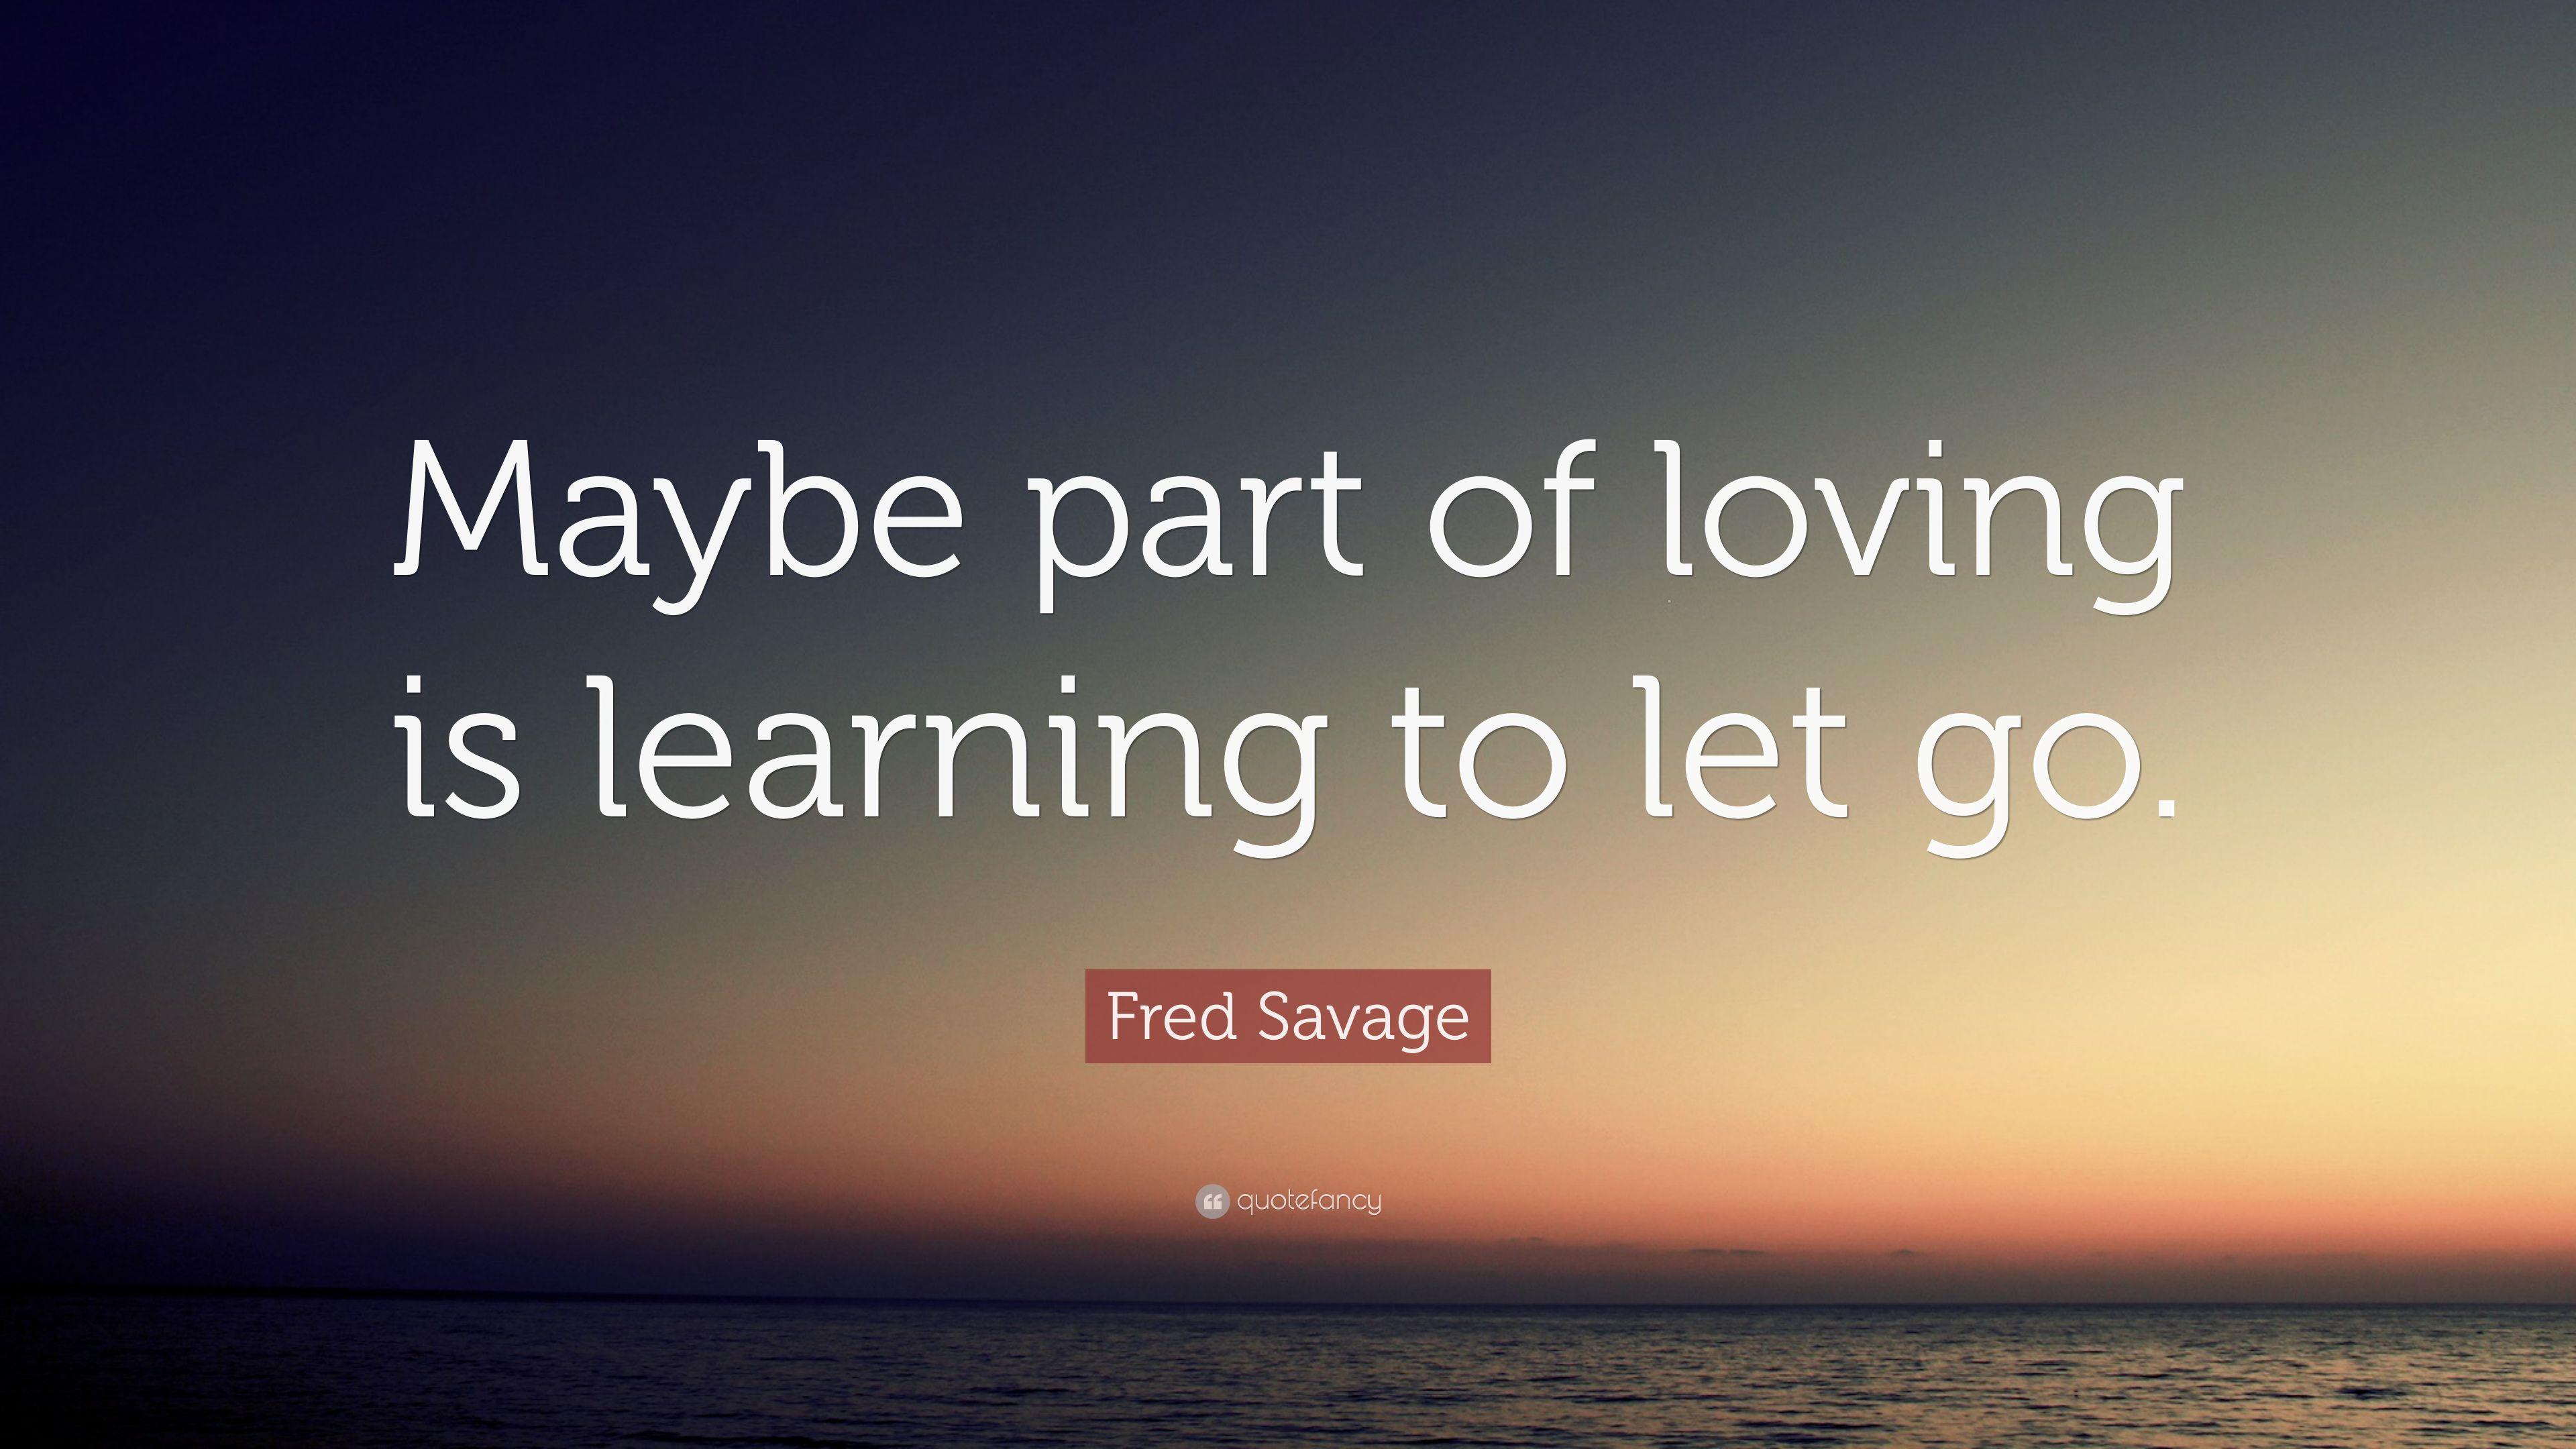 Fred Savage Quote: “Maybe part of loving is learning to let go